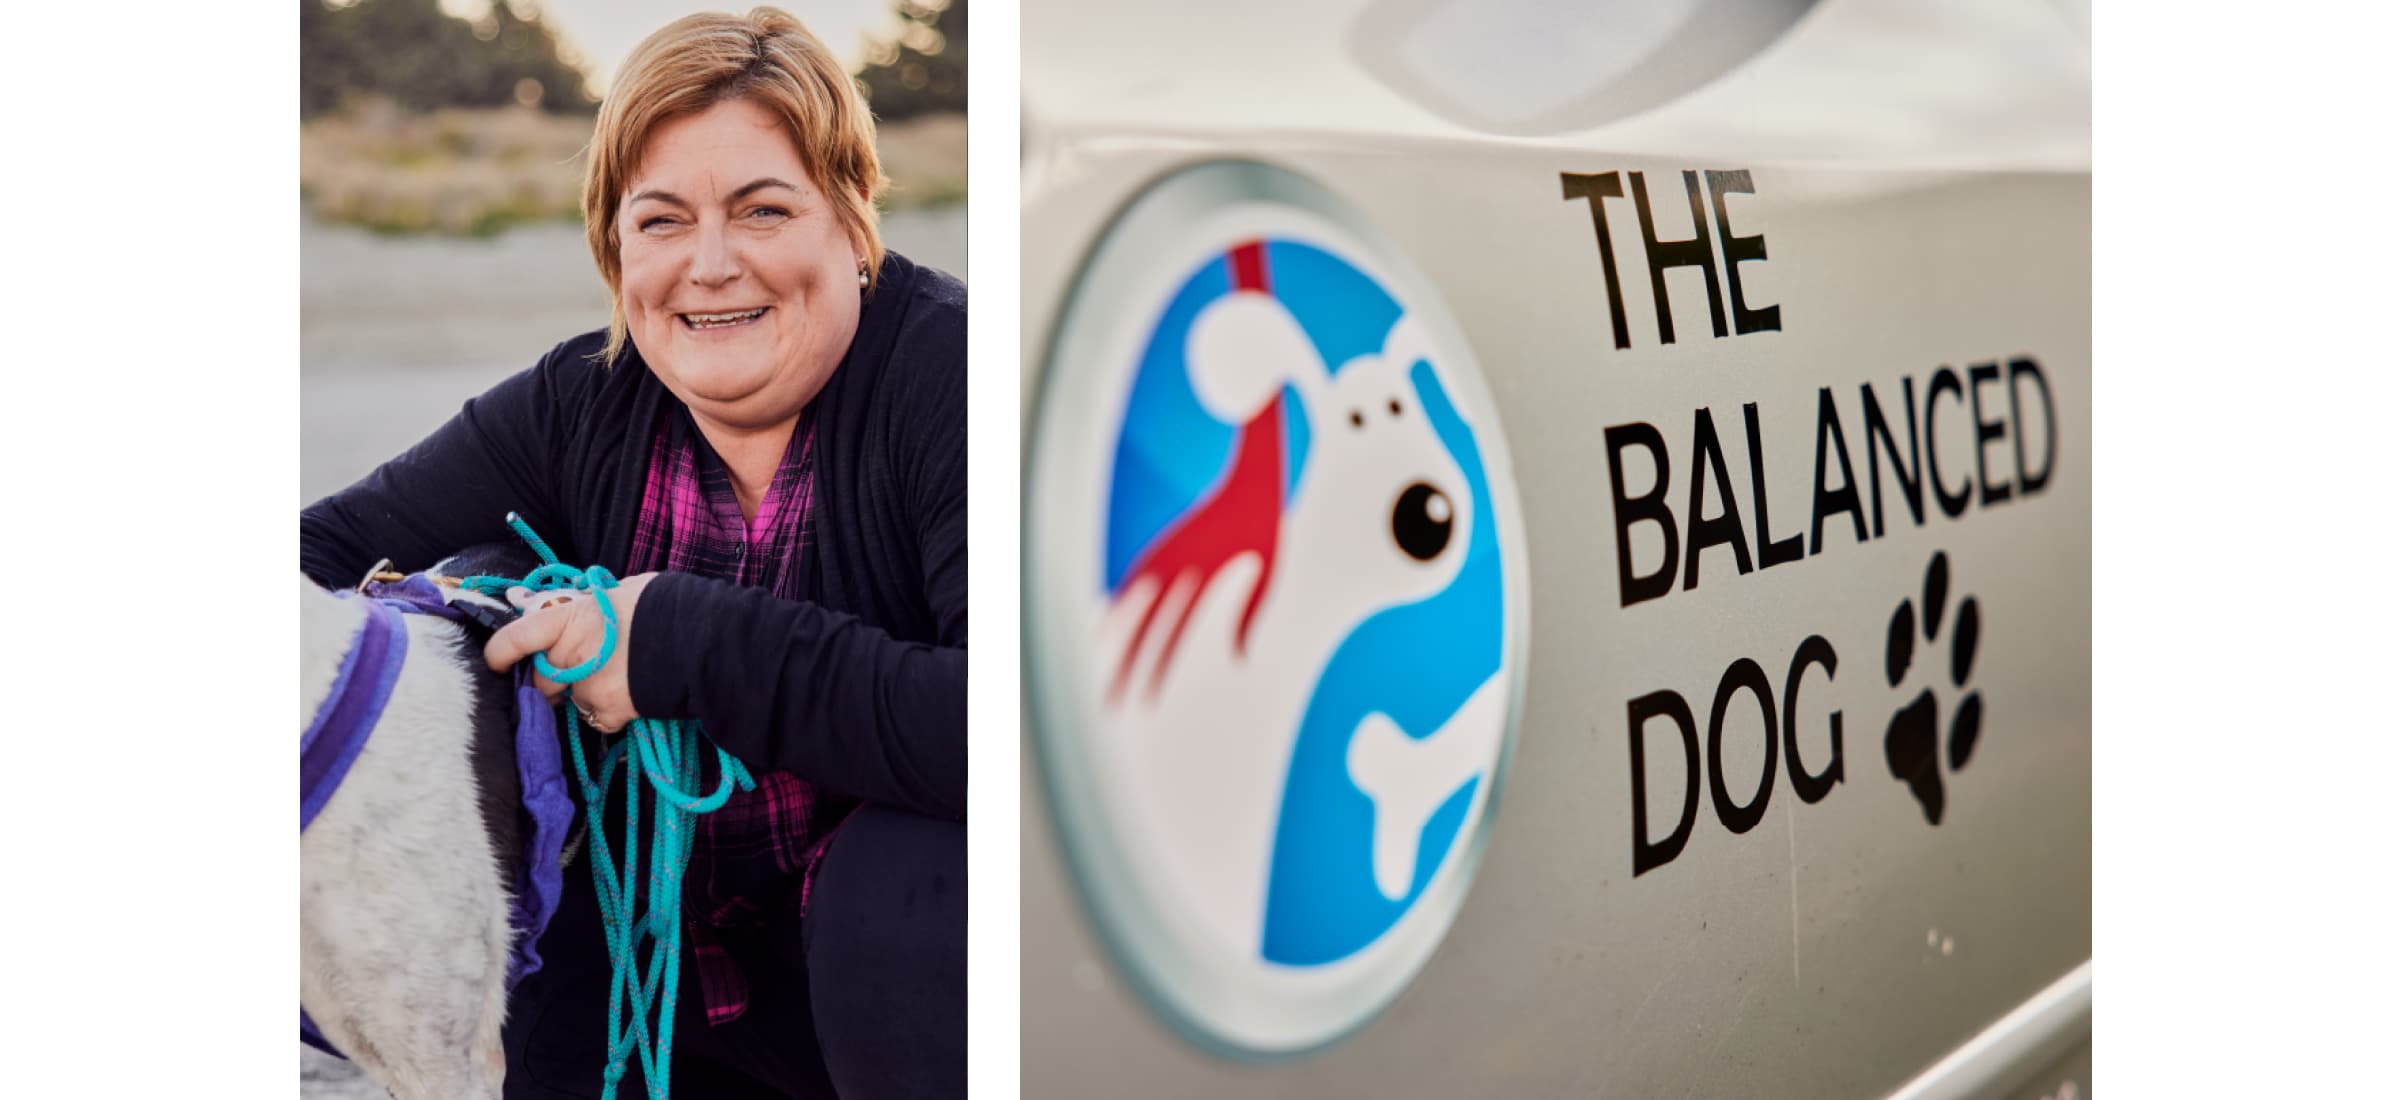 Kathleen smiling as she holds a dog, and The Balanced Dog logo displayed on a vehicle door.